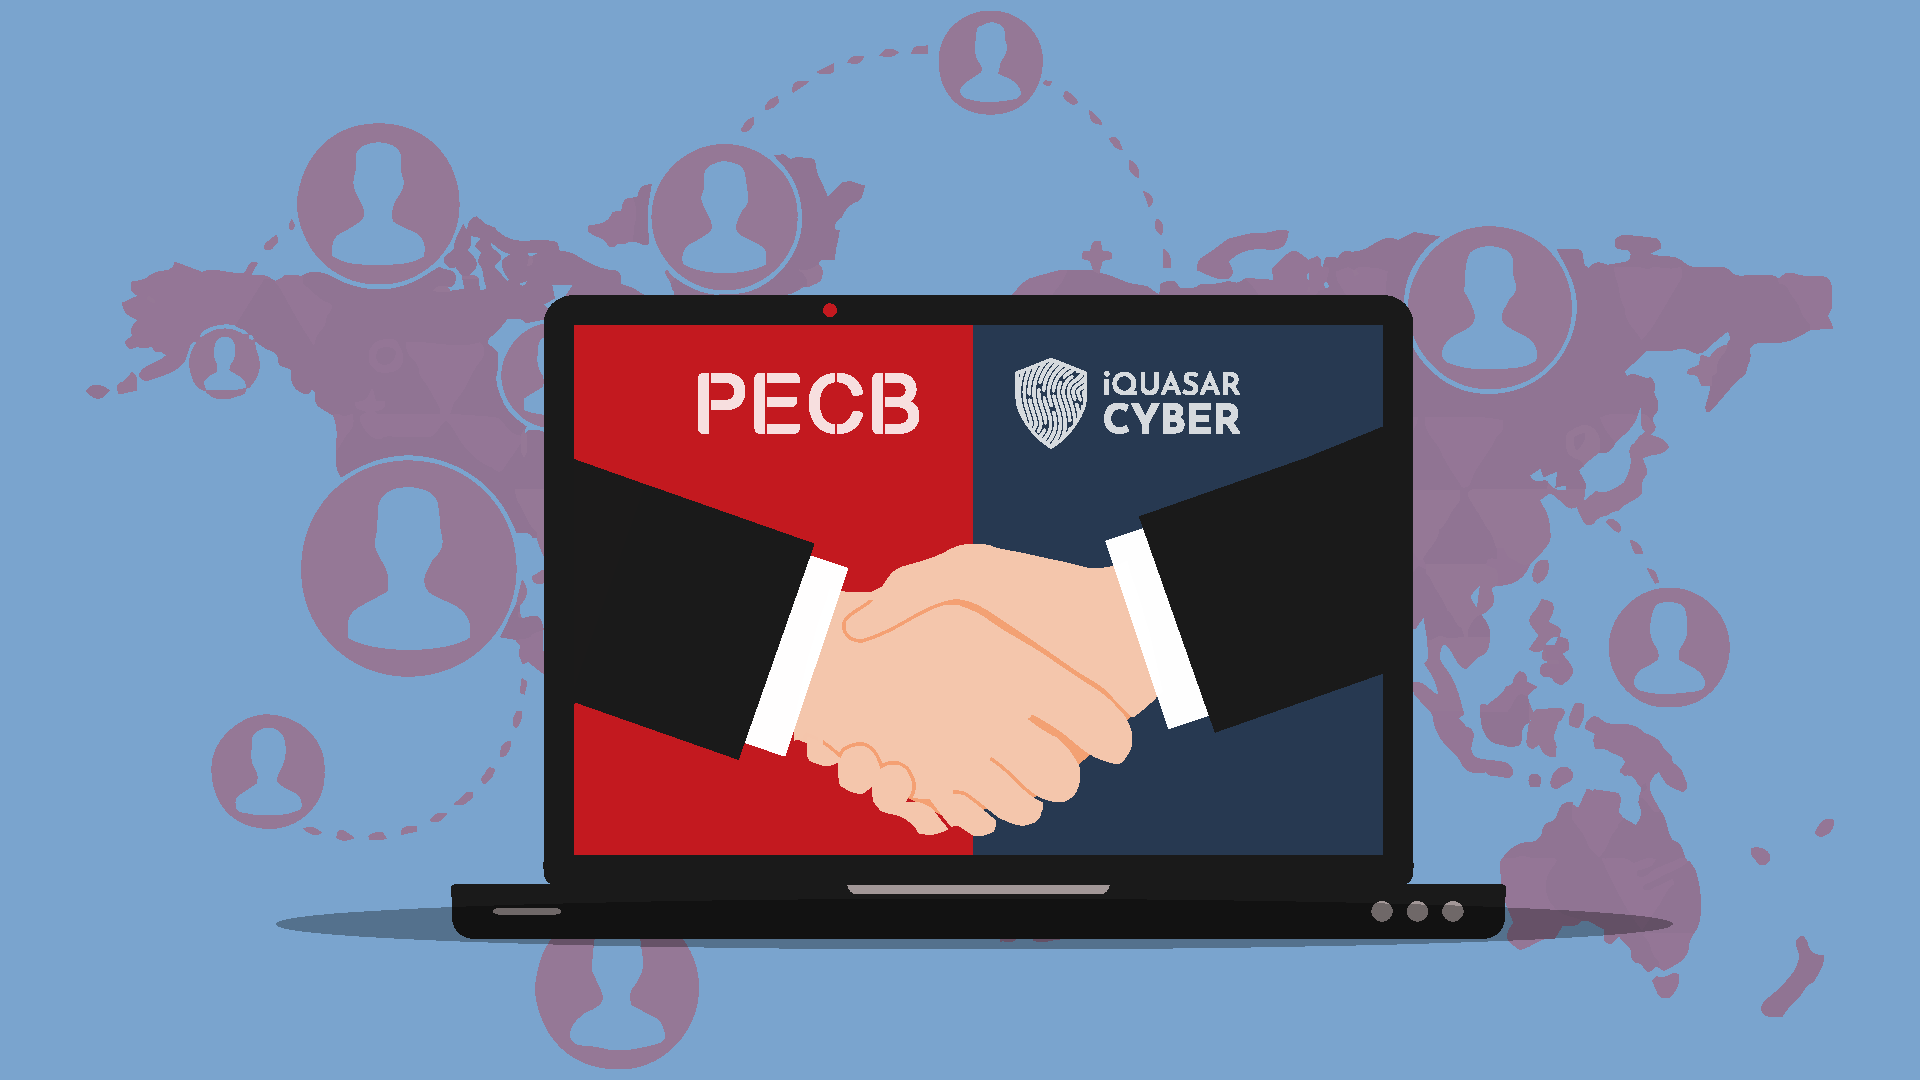 iQuasar Cyber partnership with PECB